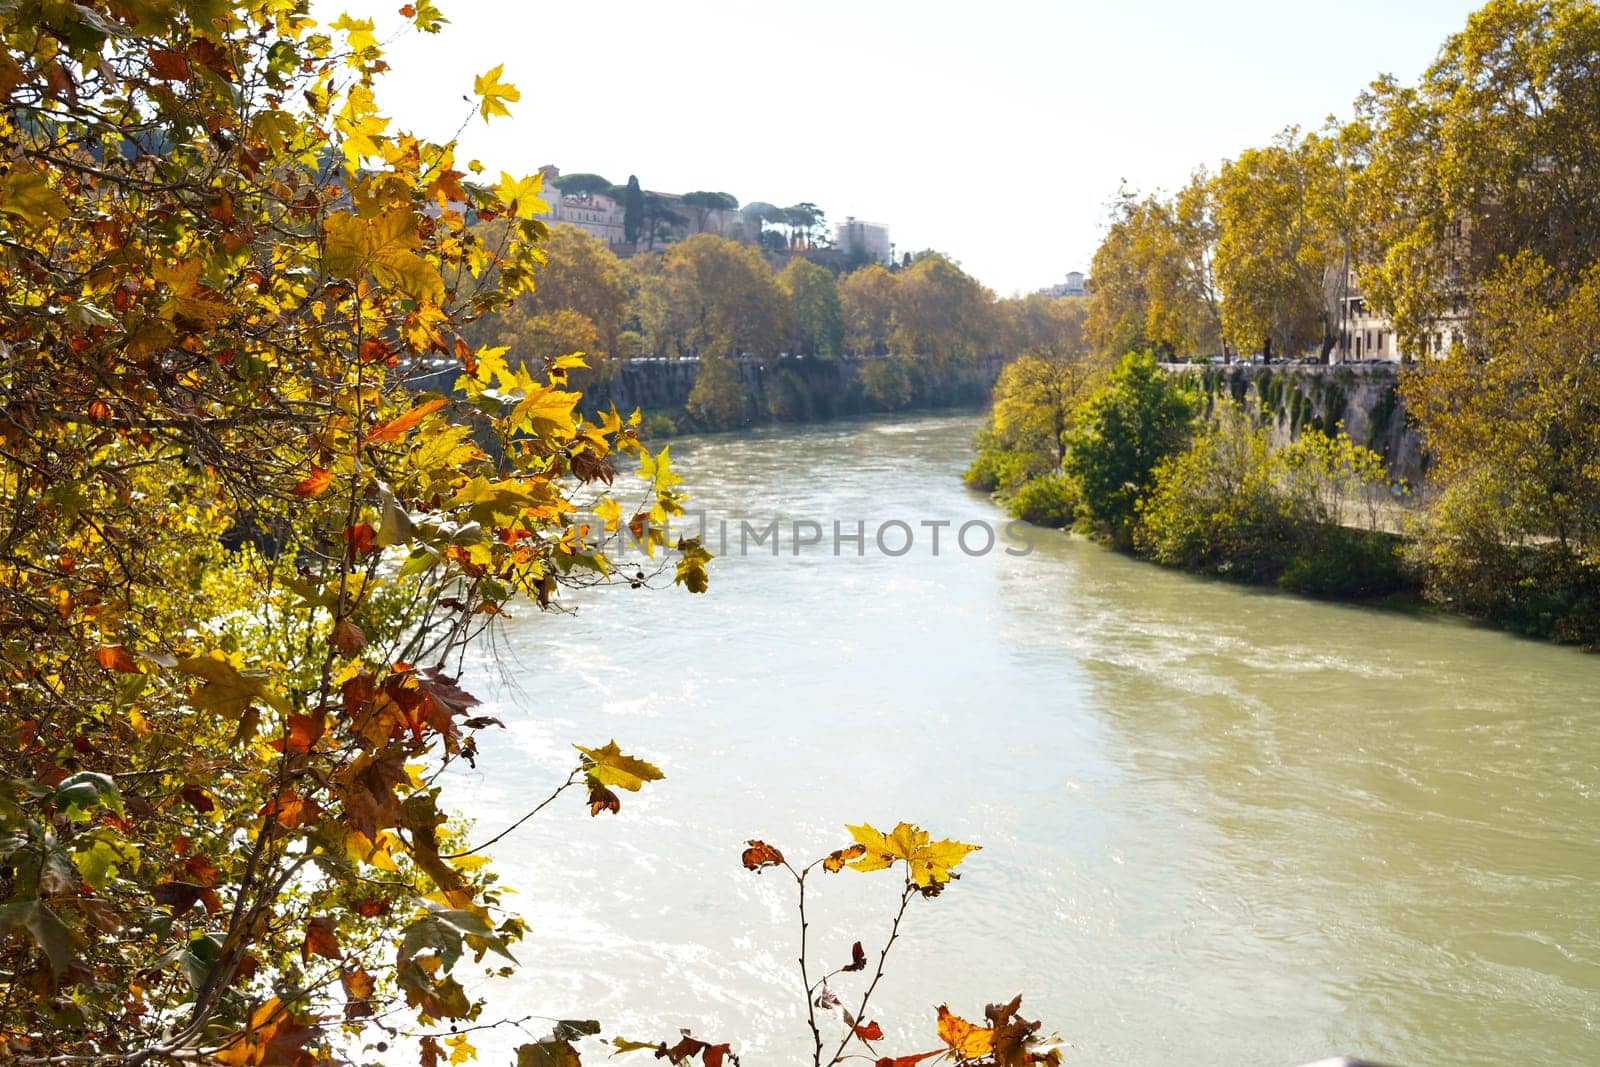 Autumn in Rome. Yellow leaves of plane trees along the river. The embankment along the Tiber, a favorite place for jogging and walking among the Romans.